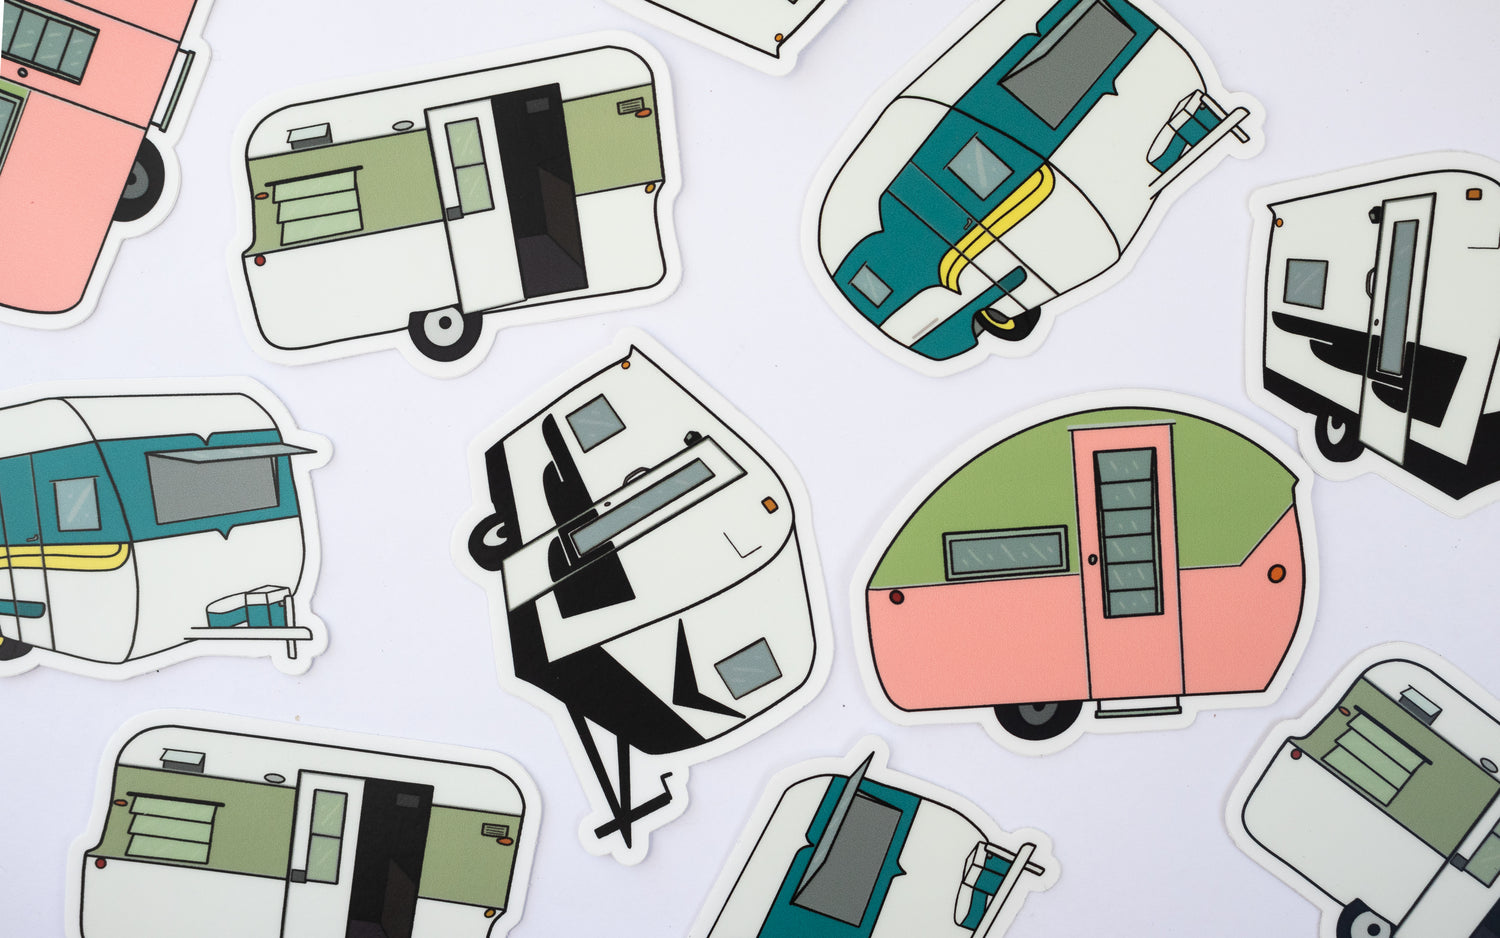 Image of 4 different colorful vintage trailers all laid out, in a fun design